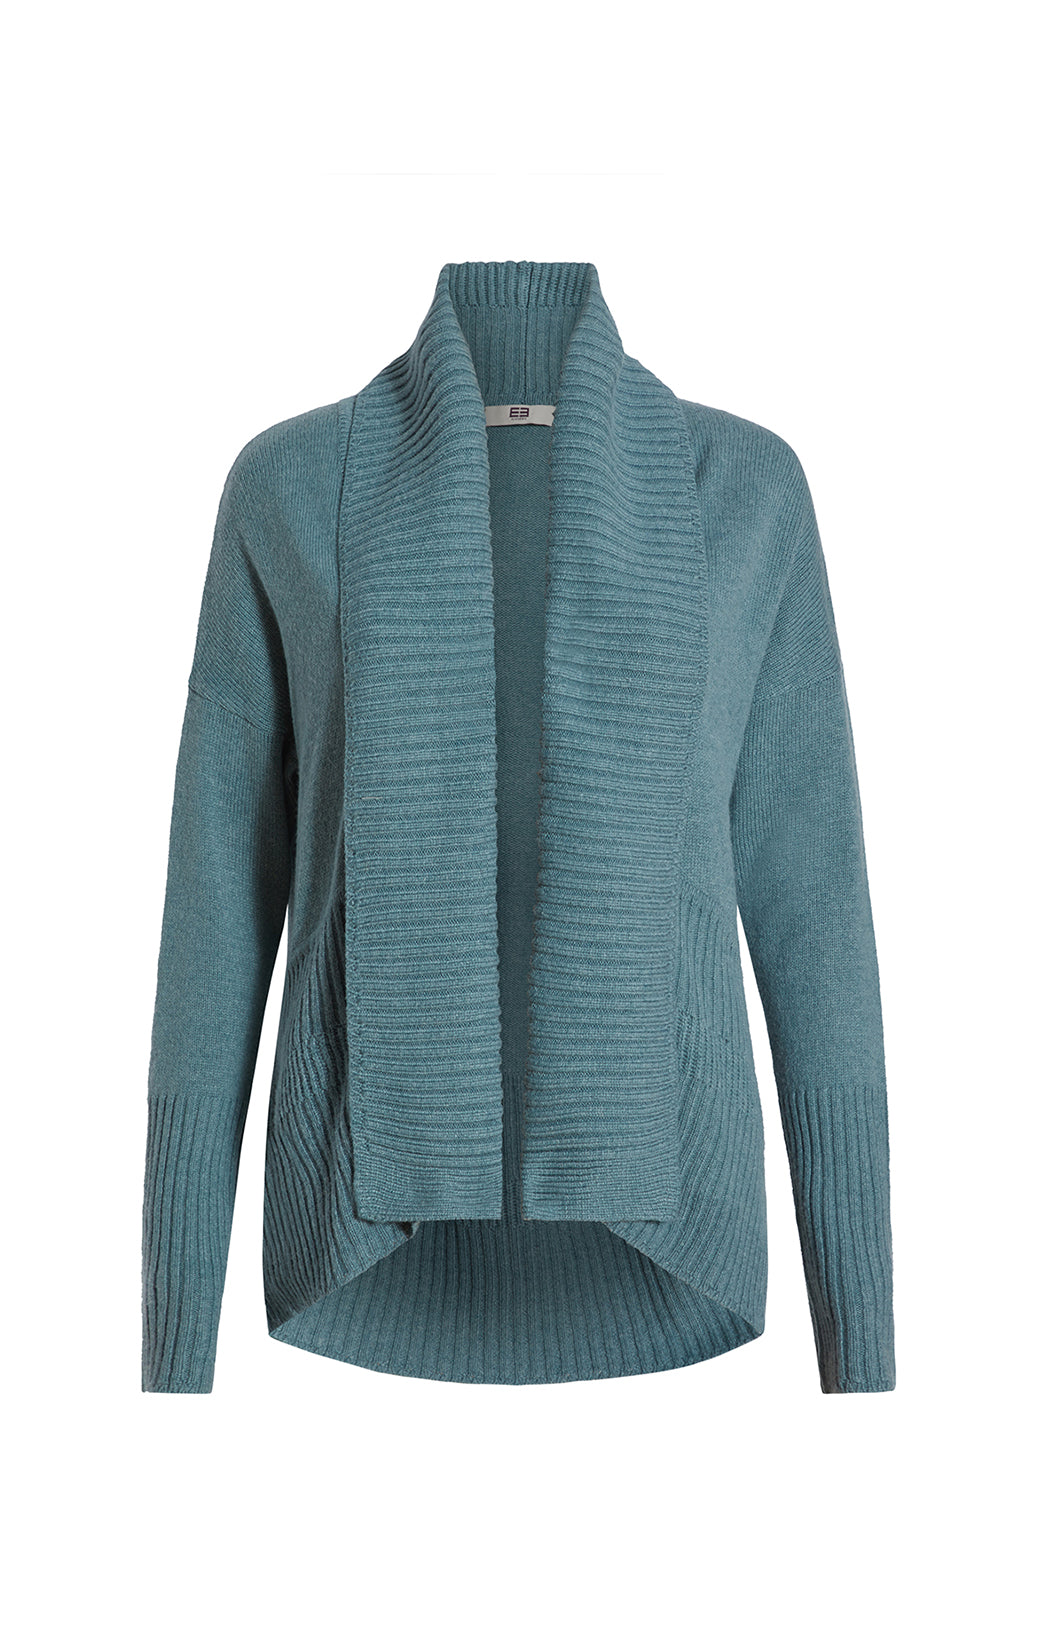 Mojave - Cashmere-Softened Funnel Neck
Sweater - Product Image